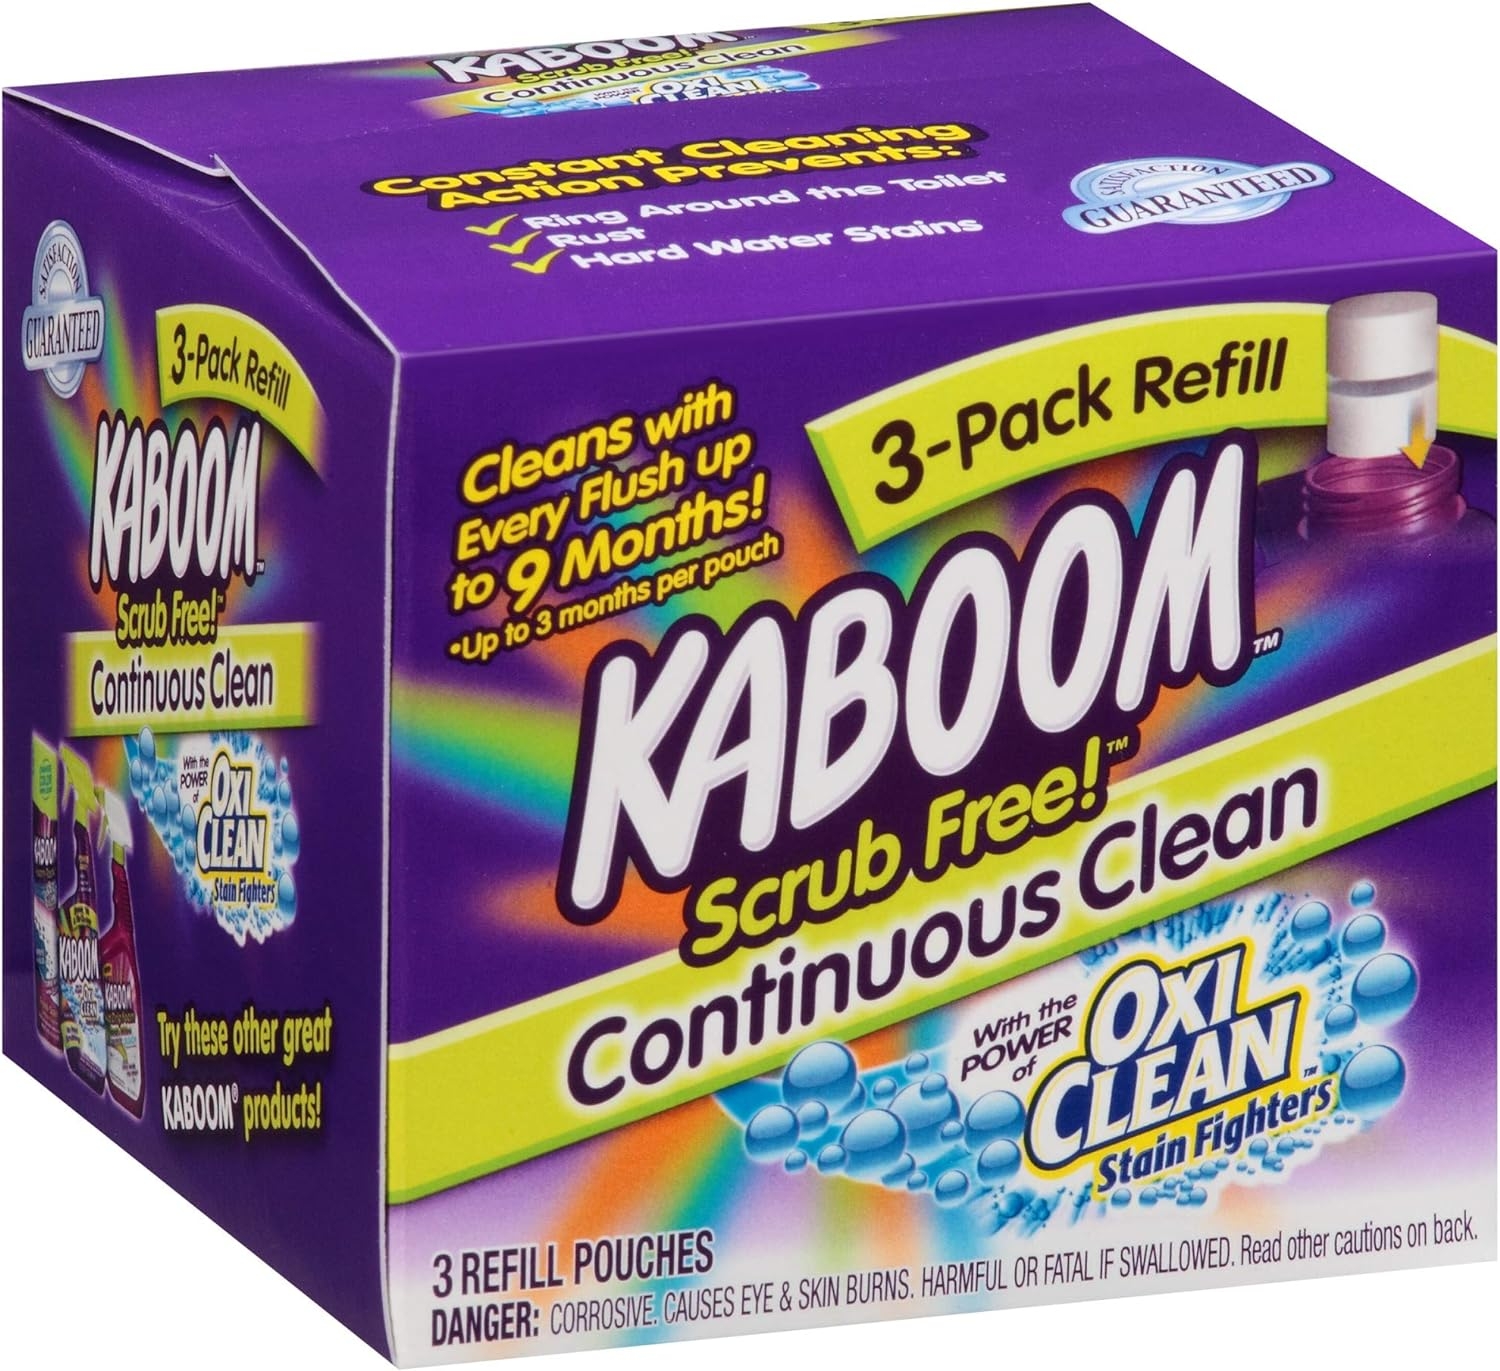 3-Pack Refill – Kaboom Scrub Free! Continuous Clean with OxiClean